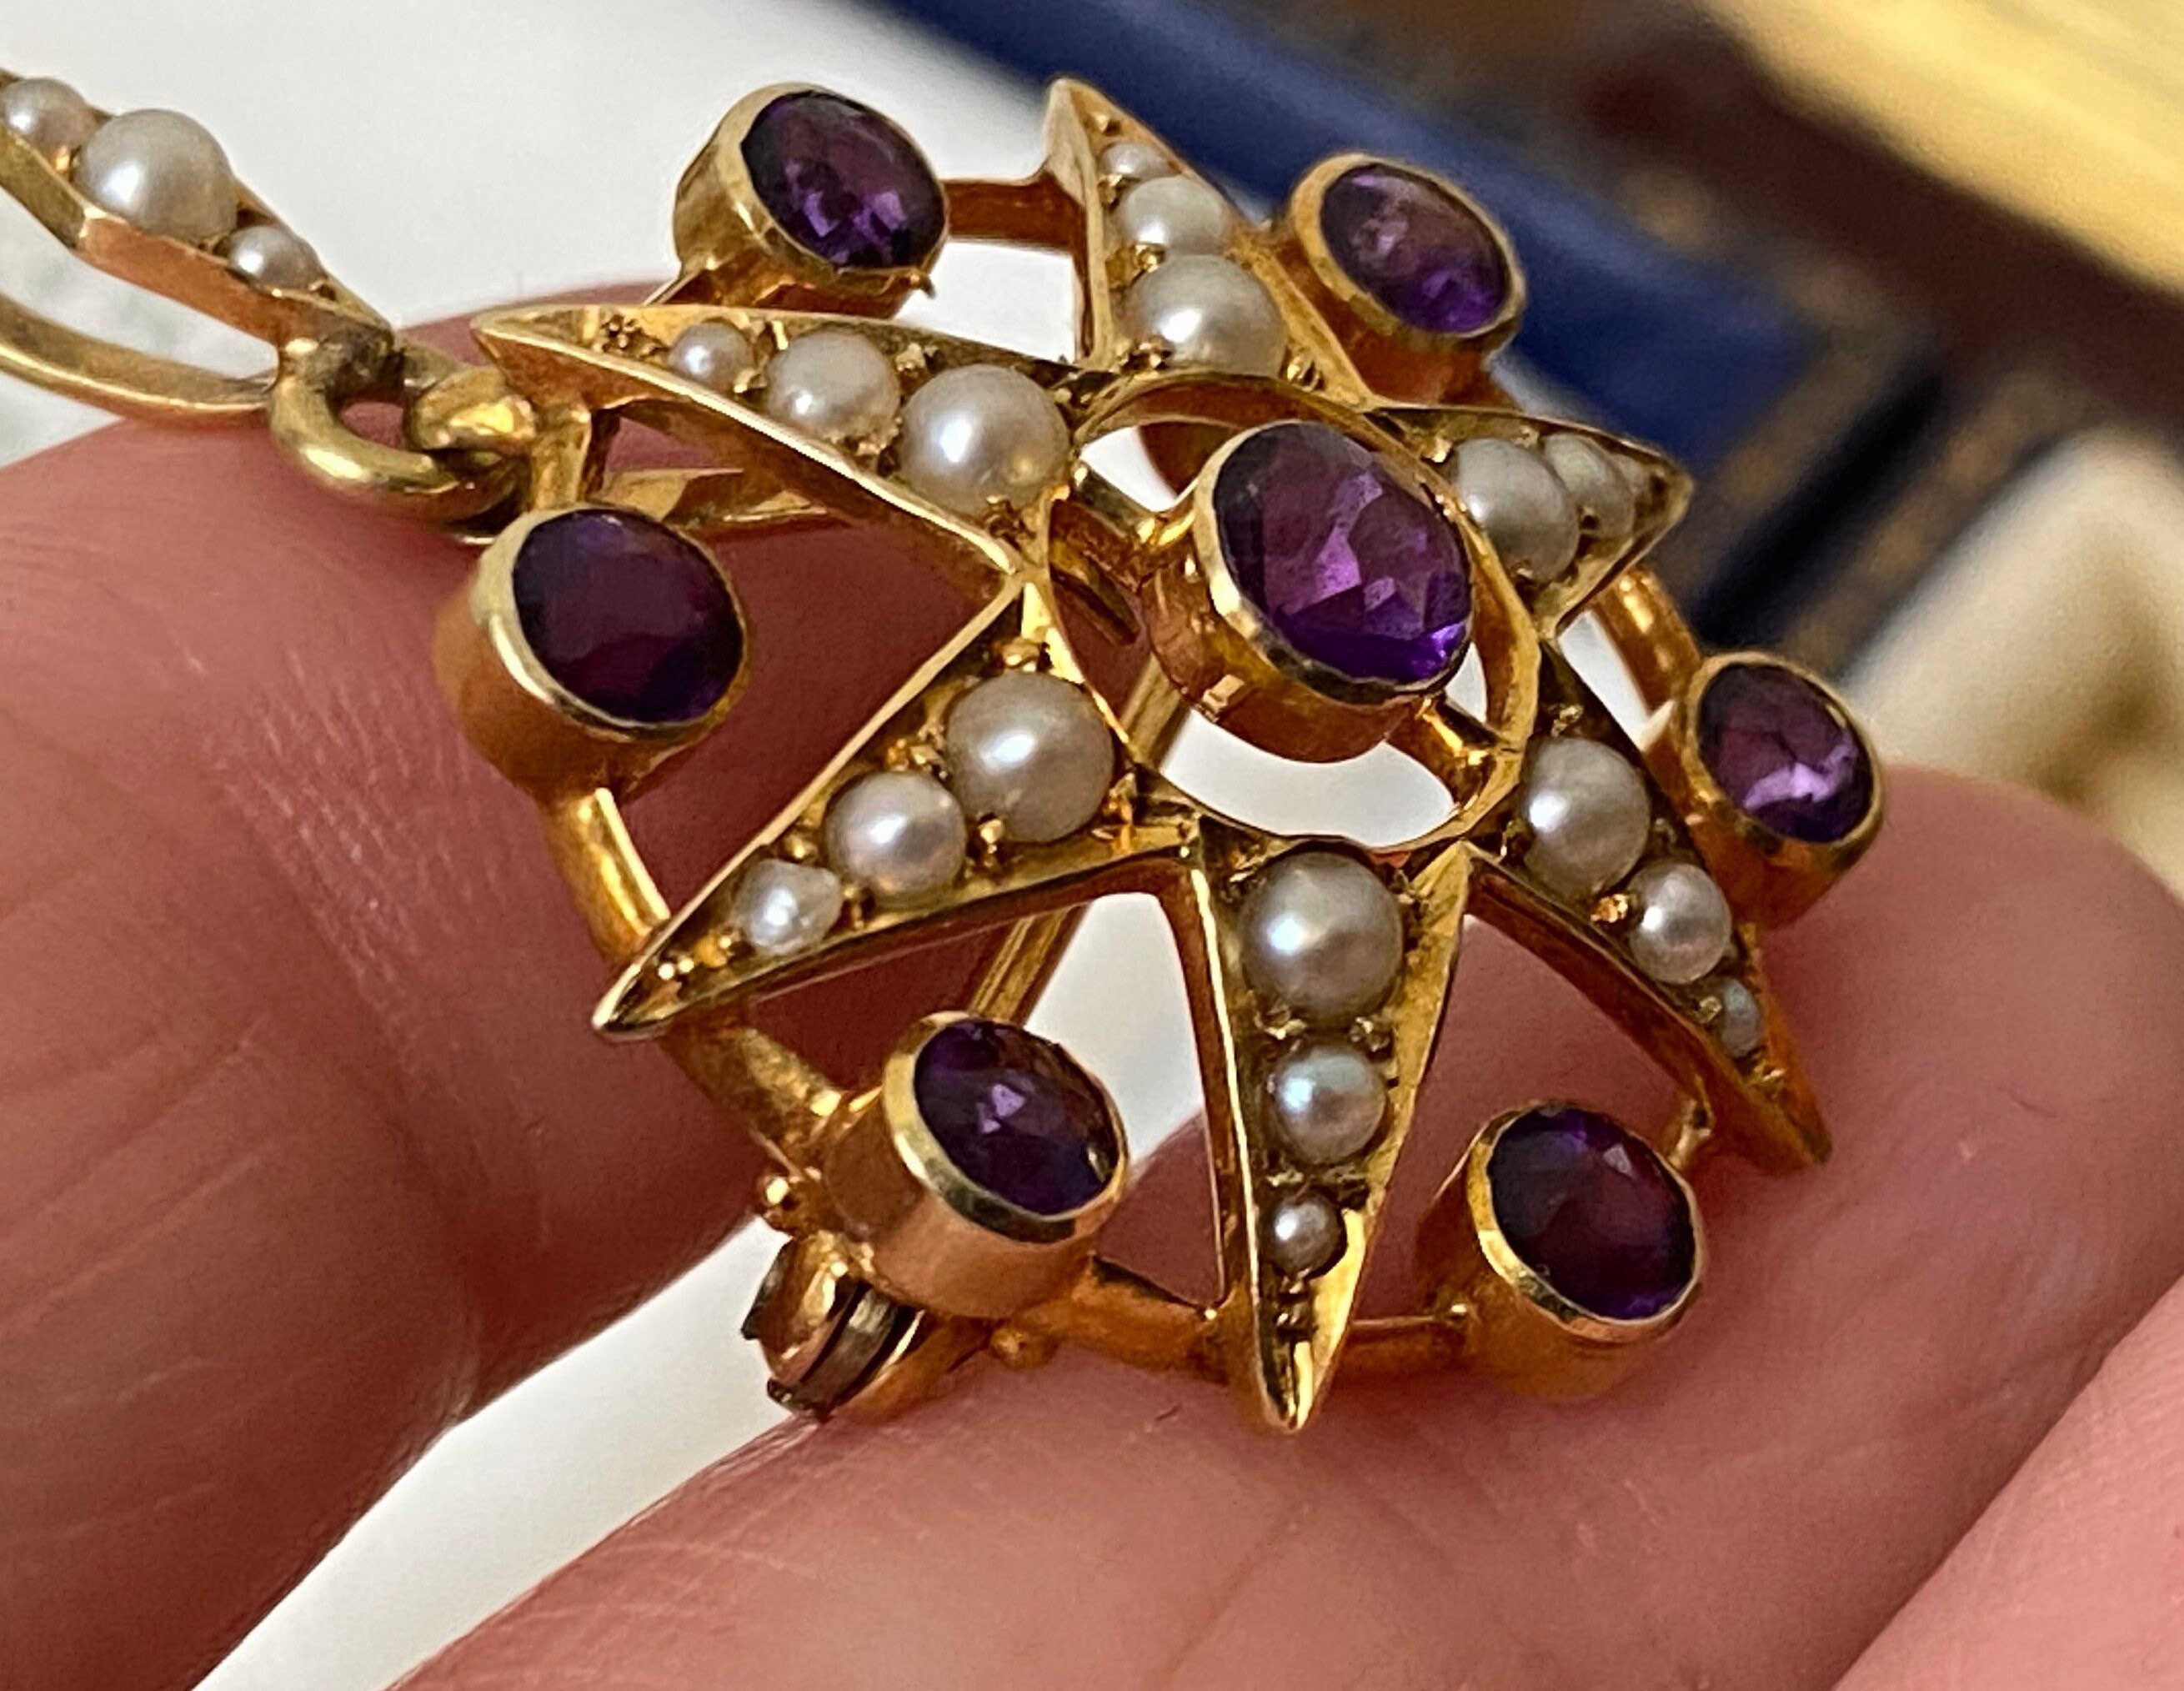 Amethyst and Pearl Vintage Brooch and Convertible Pendant Shield Shaped 14K Yellow Gold Vintage Filigree